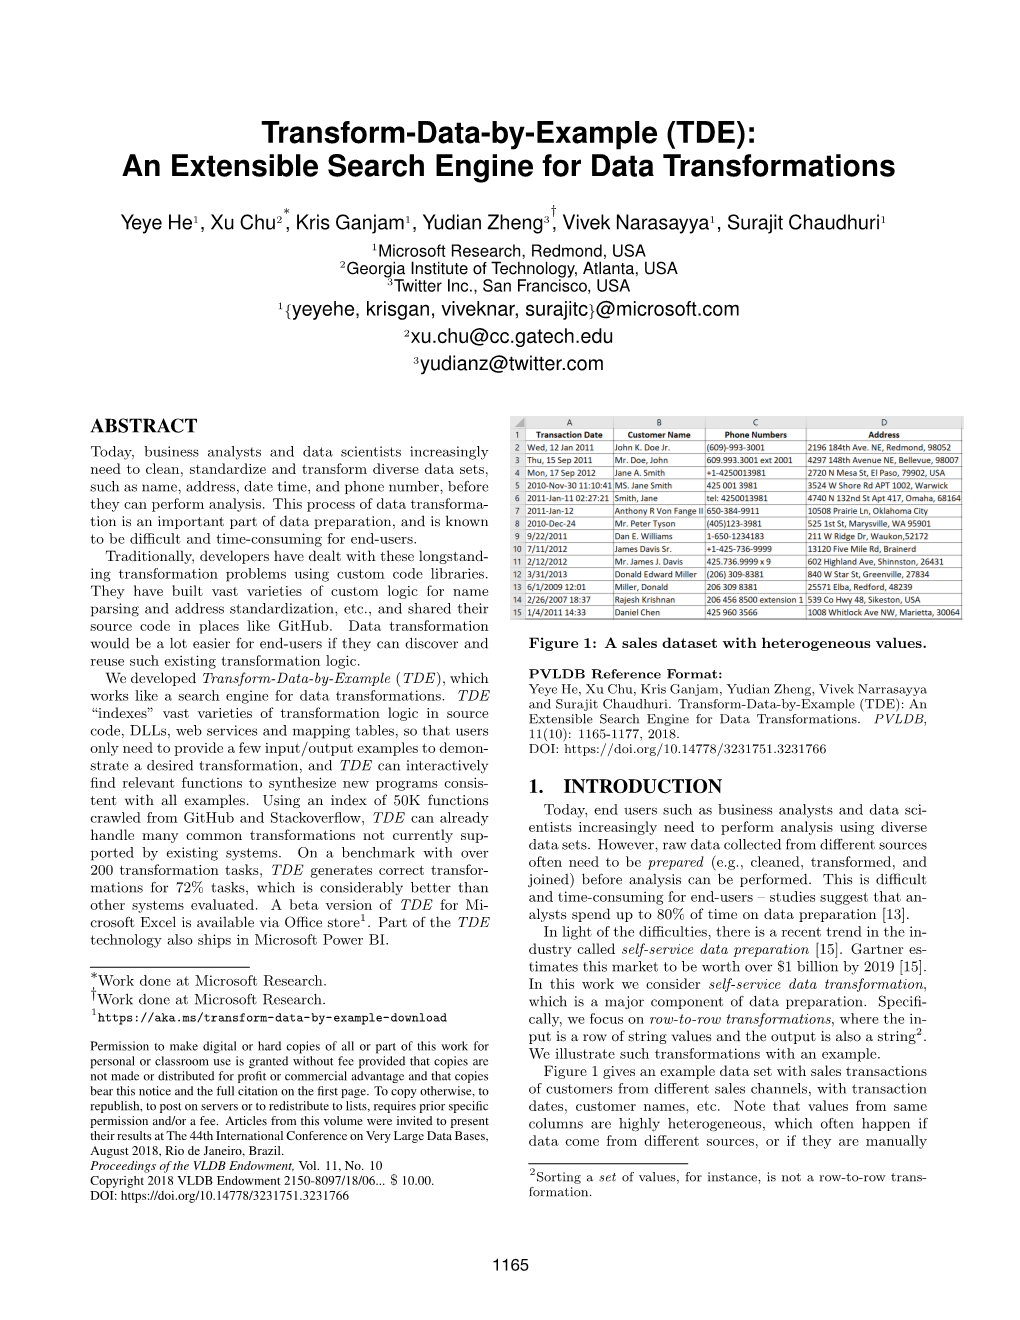 Transform-Data-By-Example (TDE): an Extensible Search Engine for Data Transformations